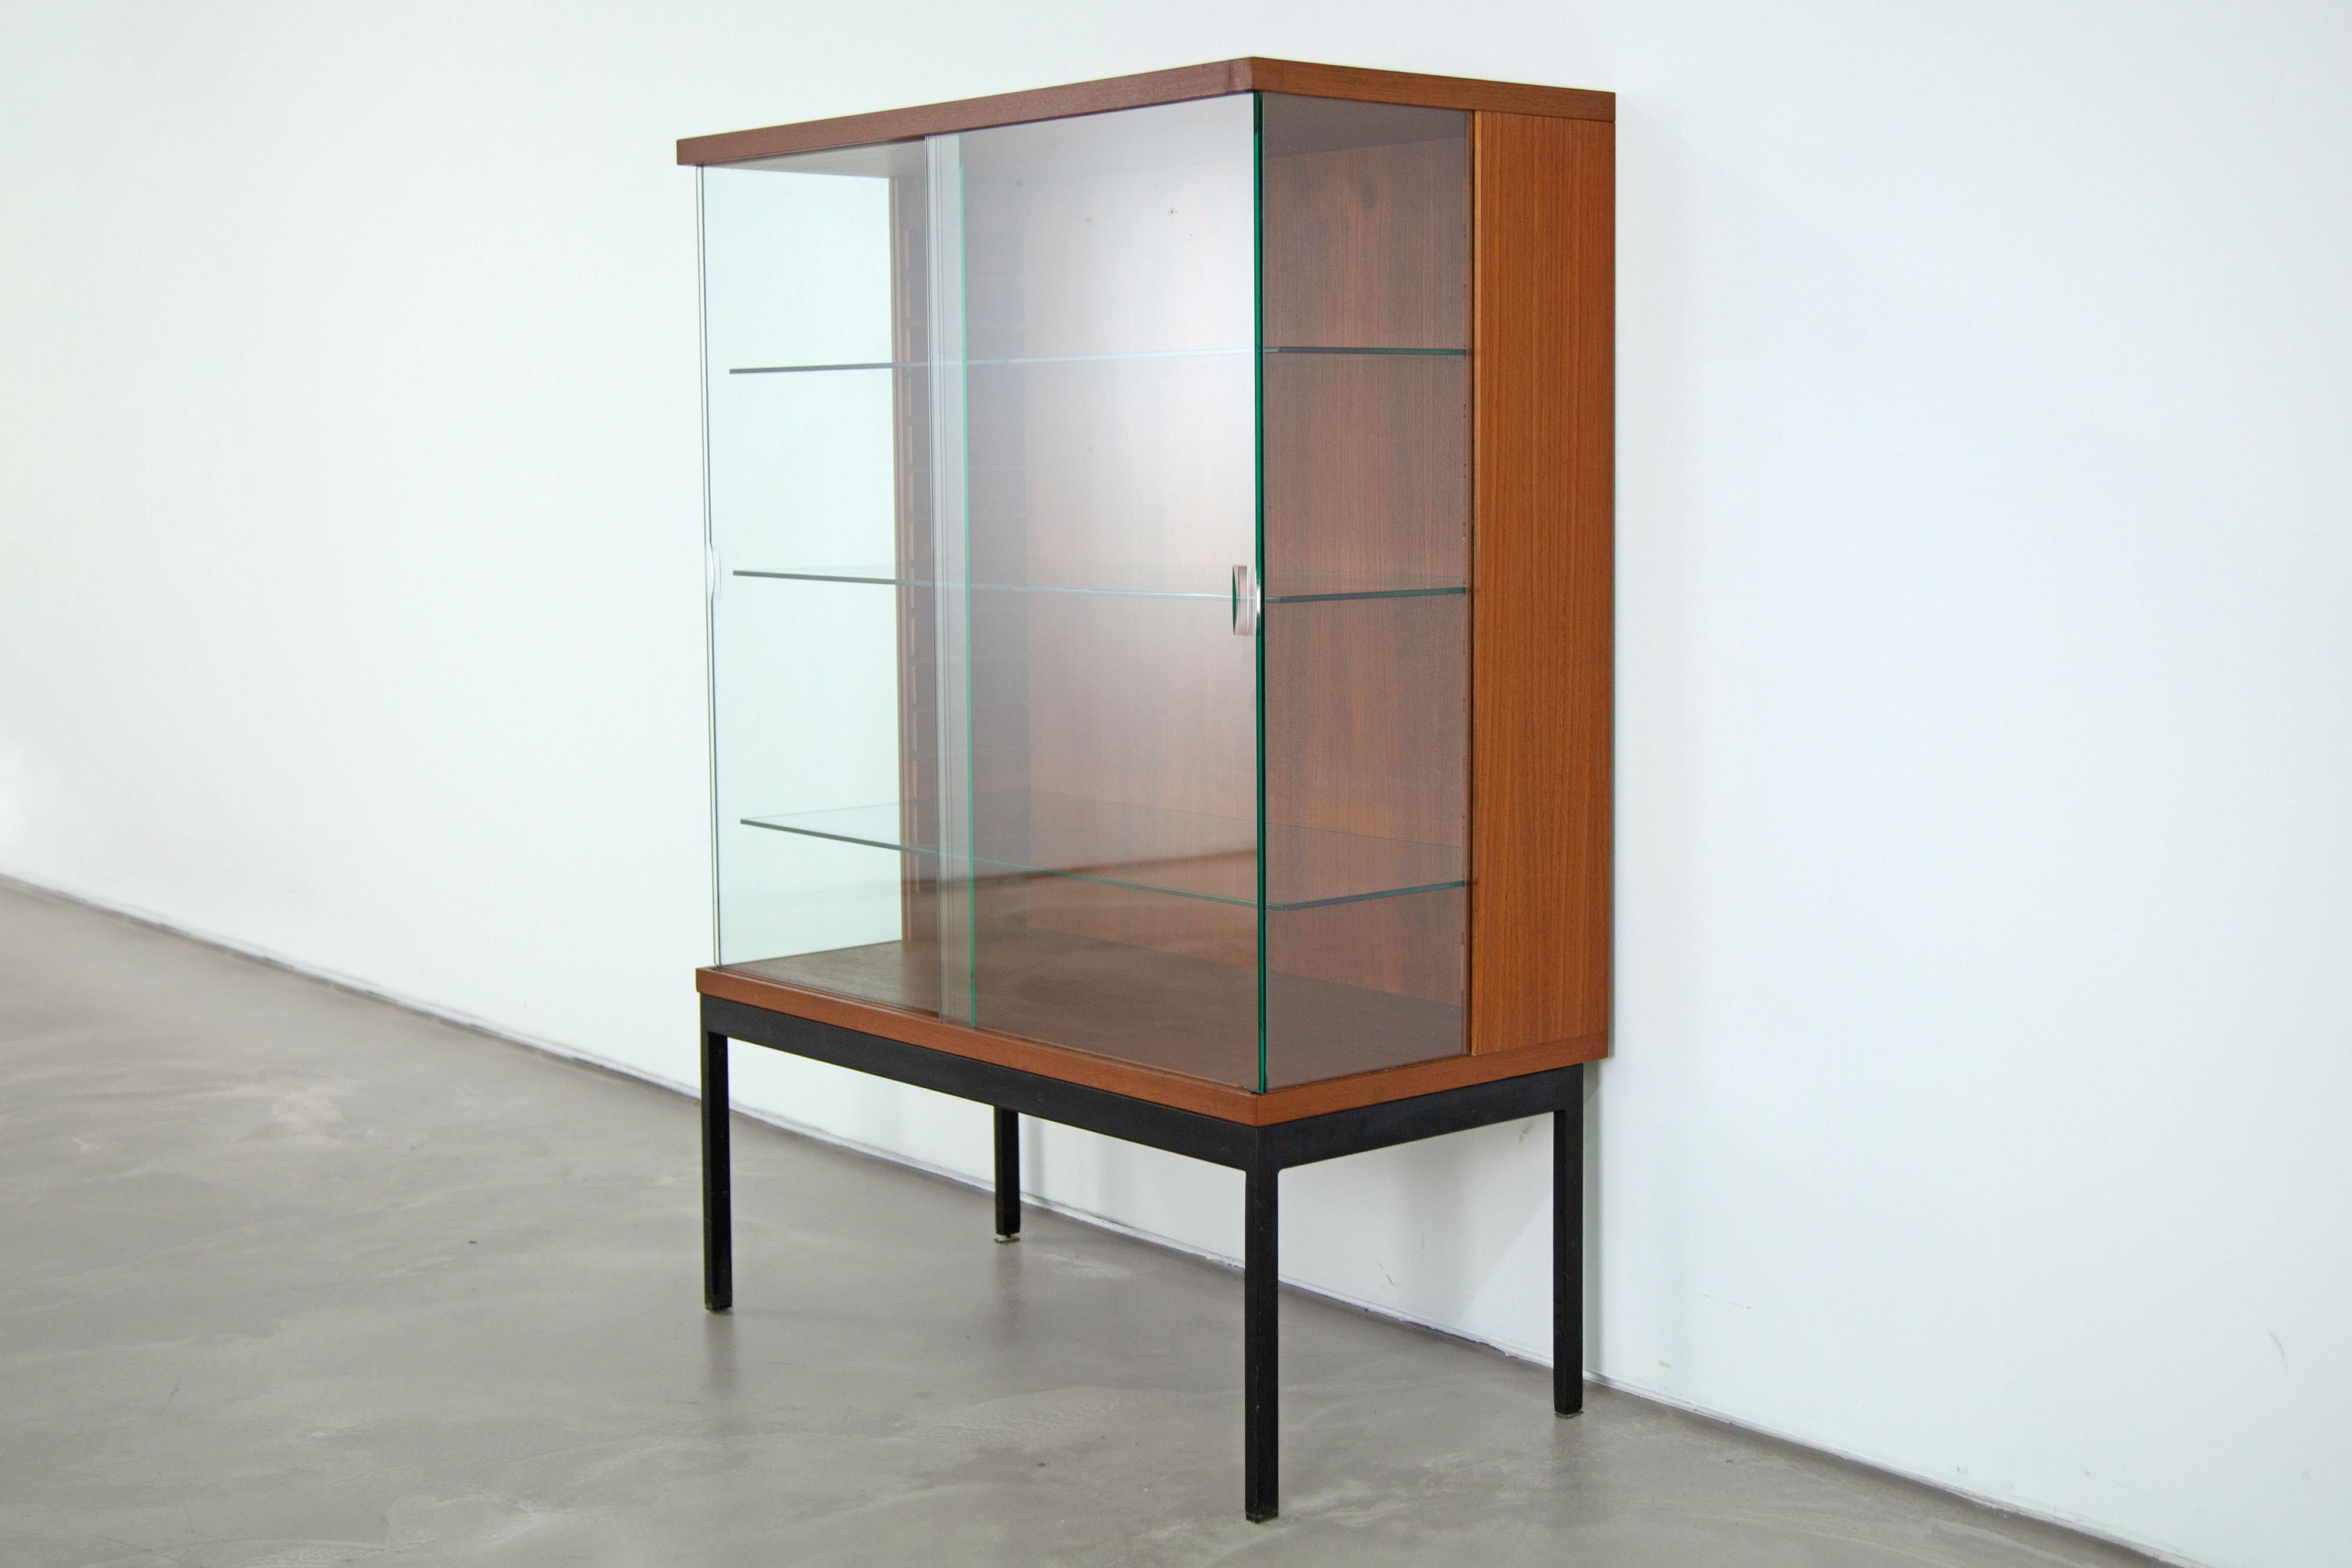 A rare piece of furniture from the early 1960s. The display is veneered with teak and features glass sliding doors.